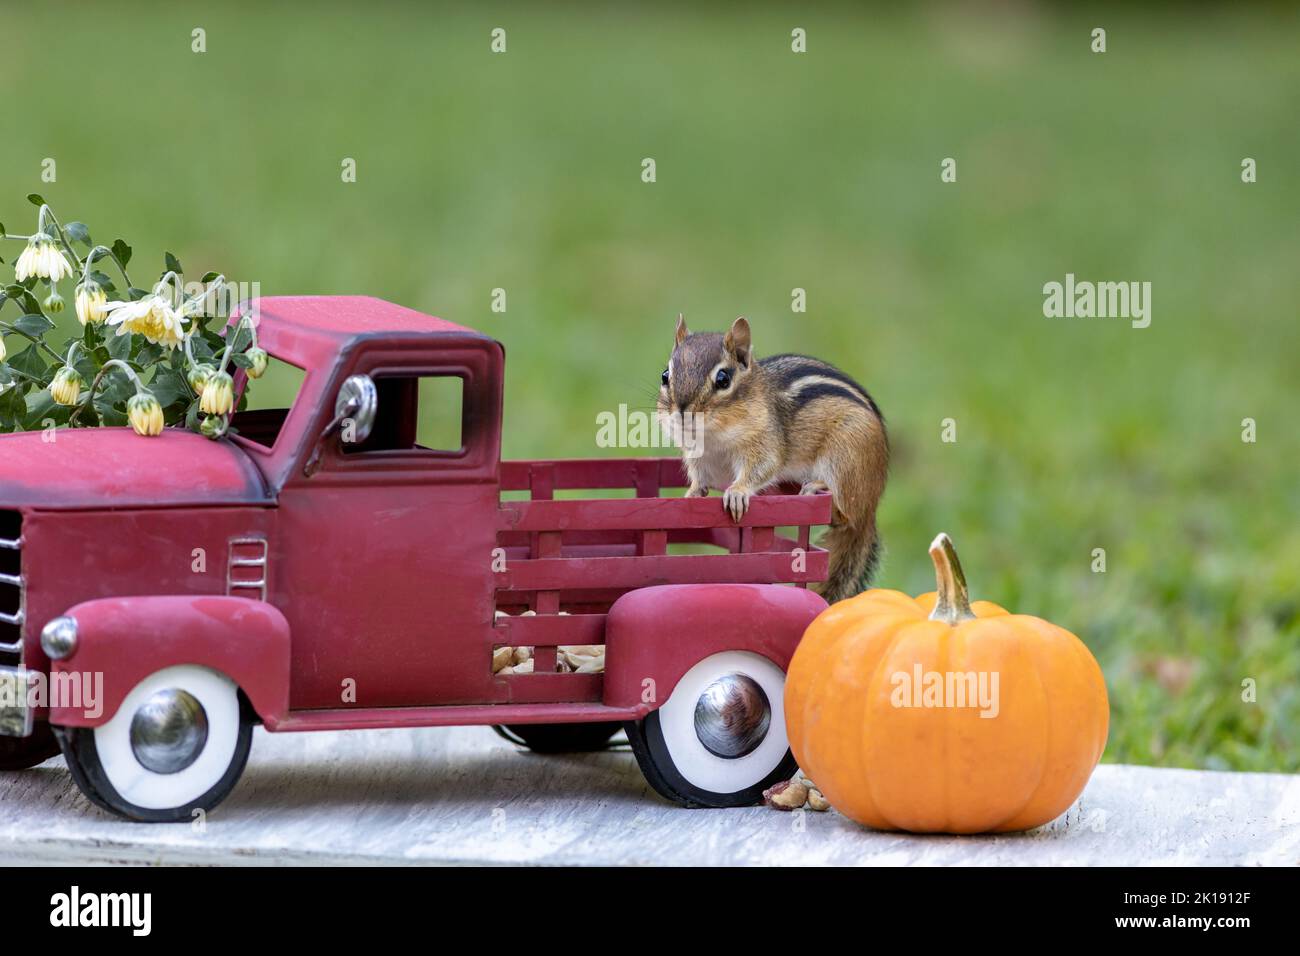 Adorable Eastern Chipmunk searches for snacks in Fall Autumn scene with classic red truck and pumpkin Stock Photo